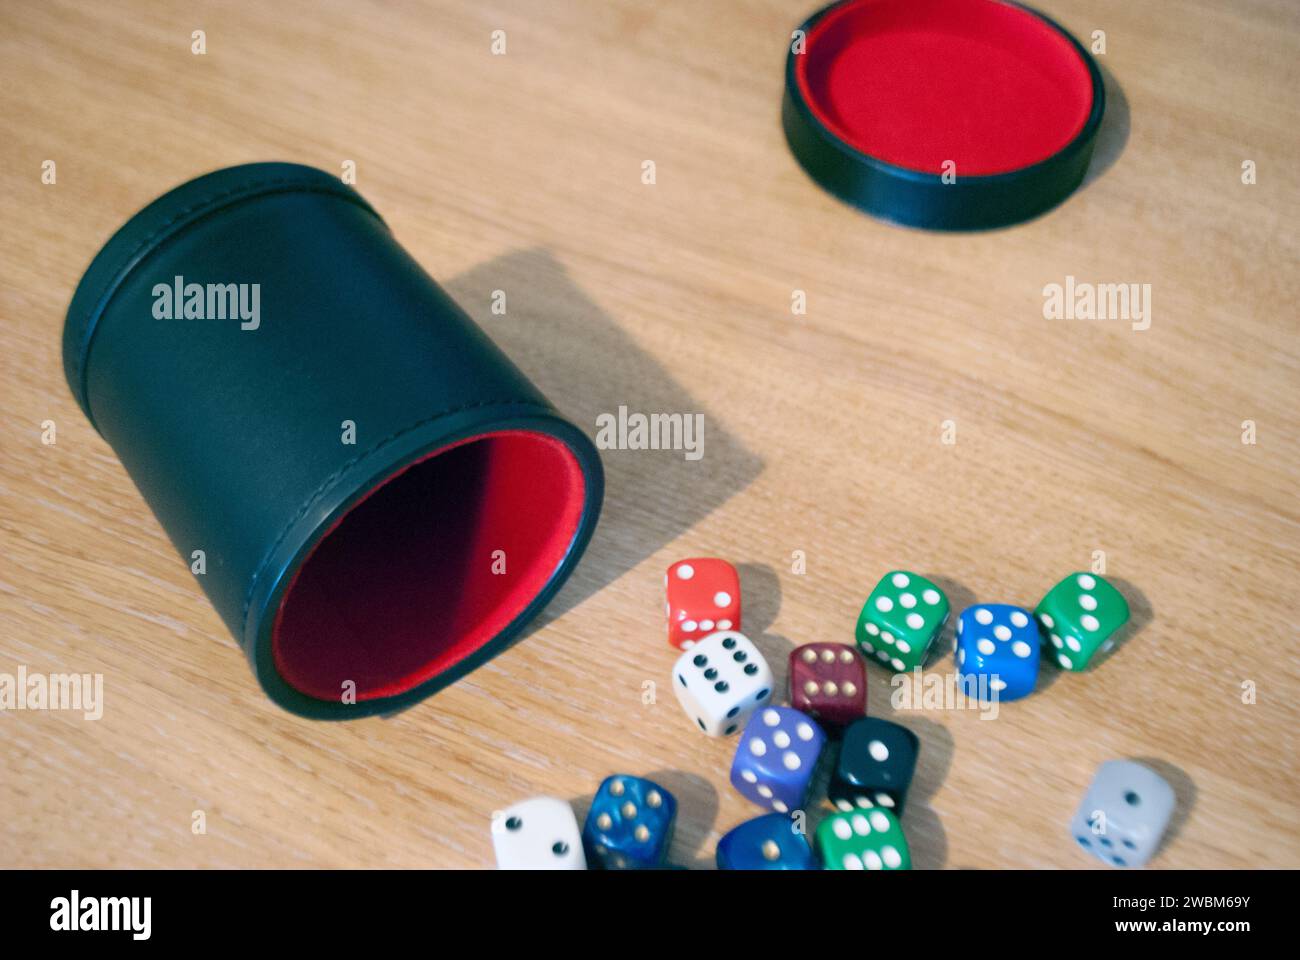 Dice spilling from black dice cup Stock Photo